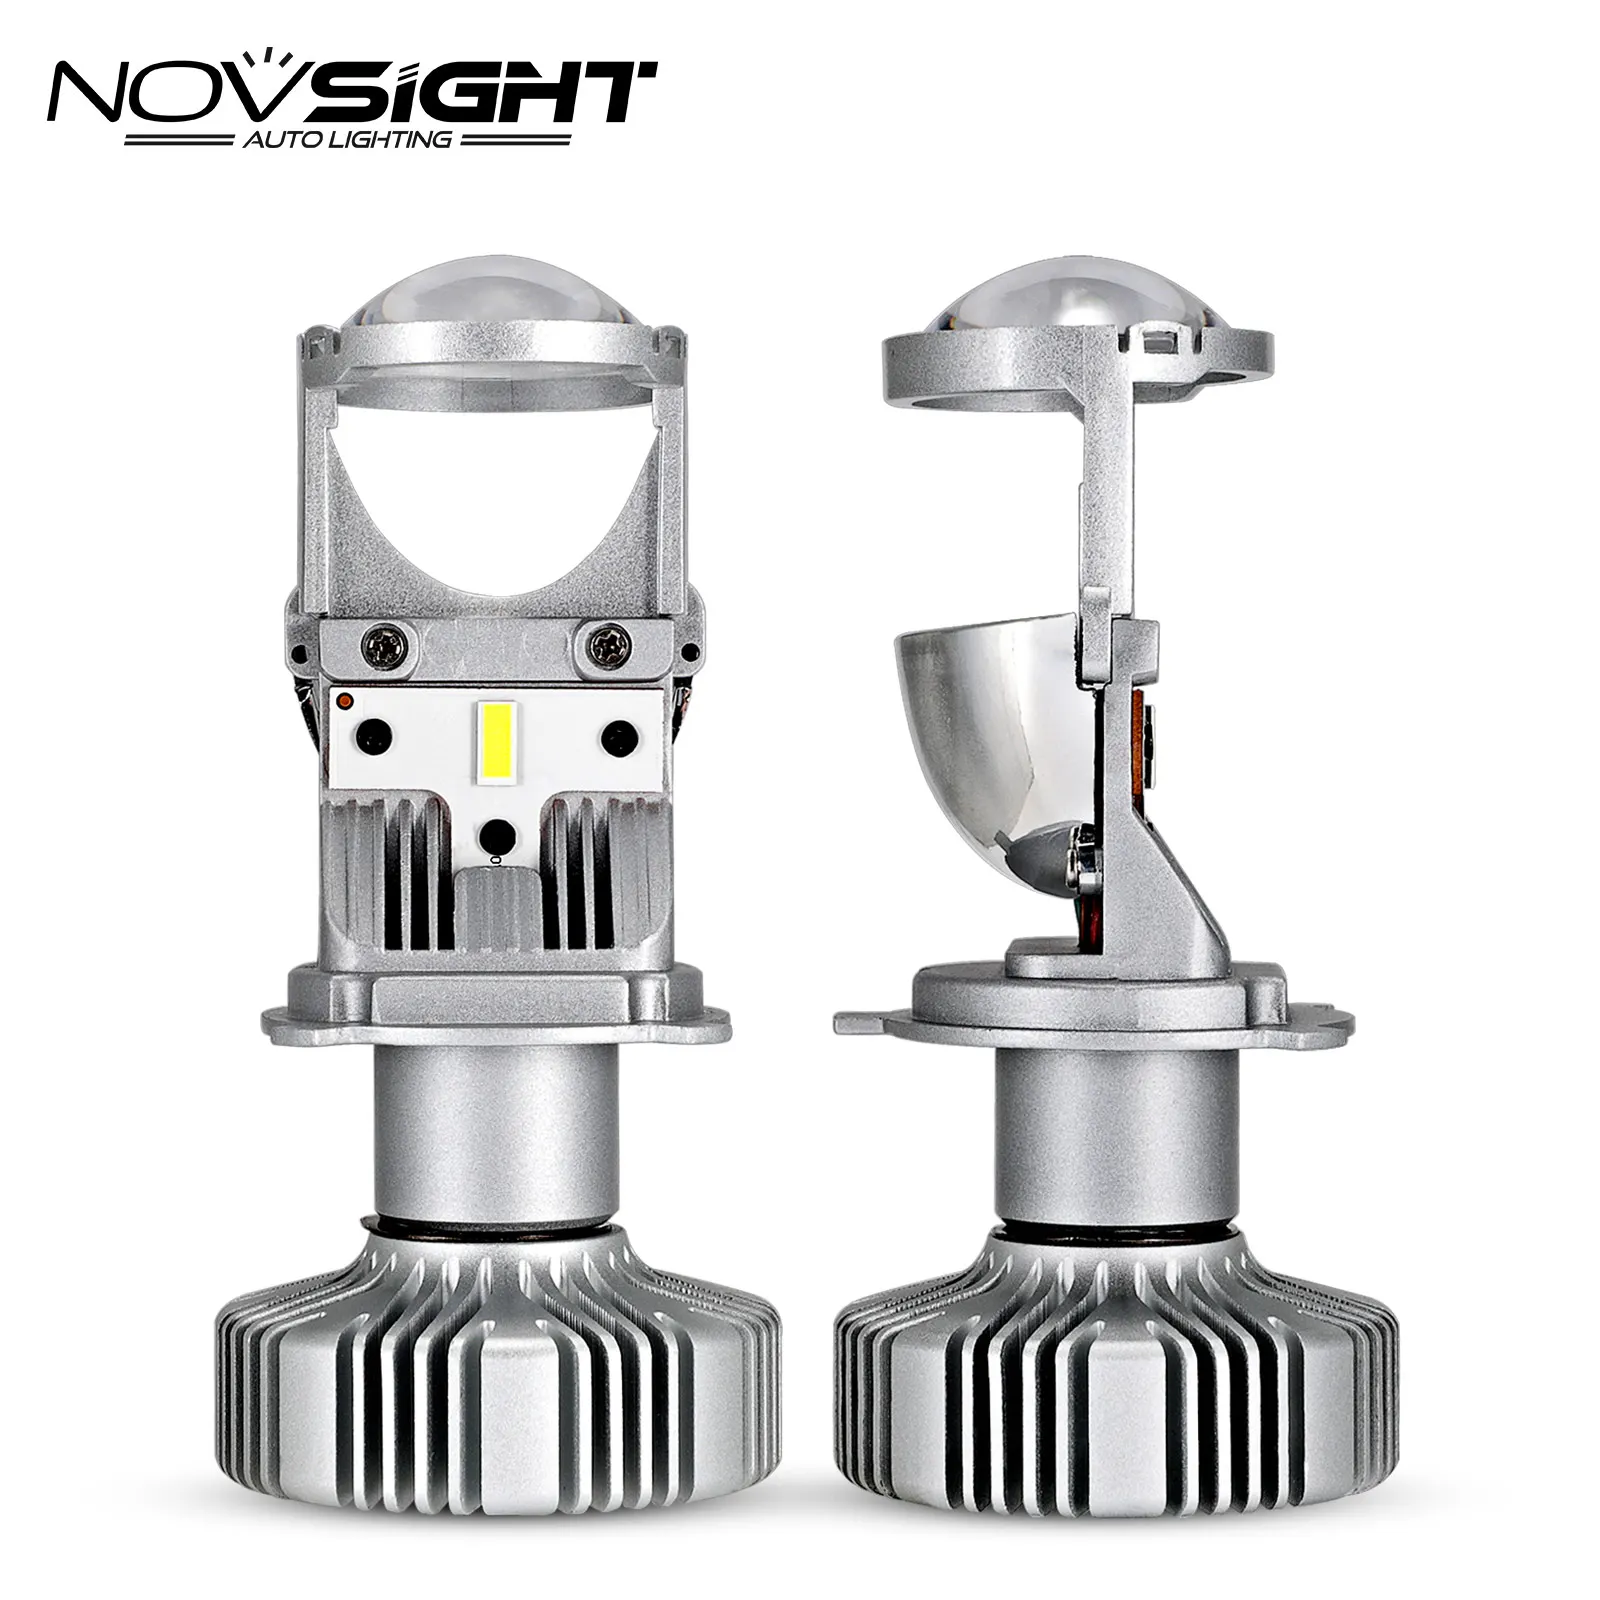 Novsight led headlights H4 H7 90W lens/ Projector design perfectly replace HID auto lighting system Led kits H7 H4